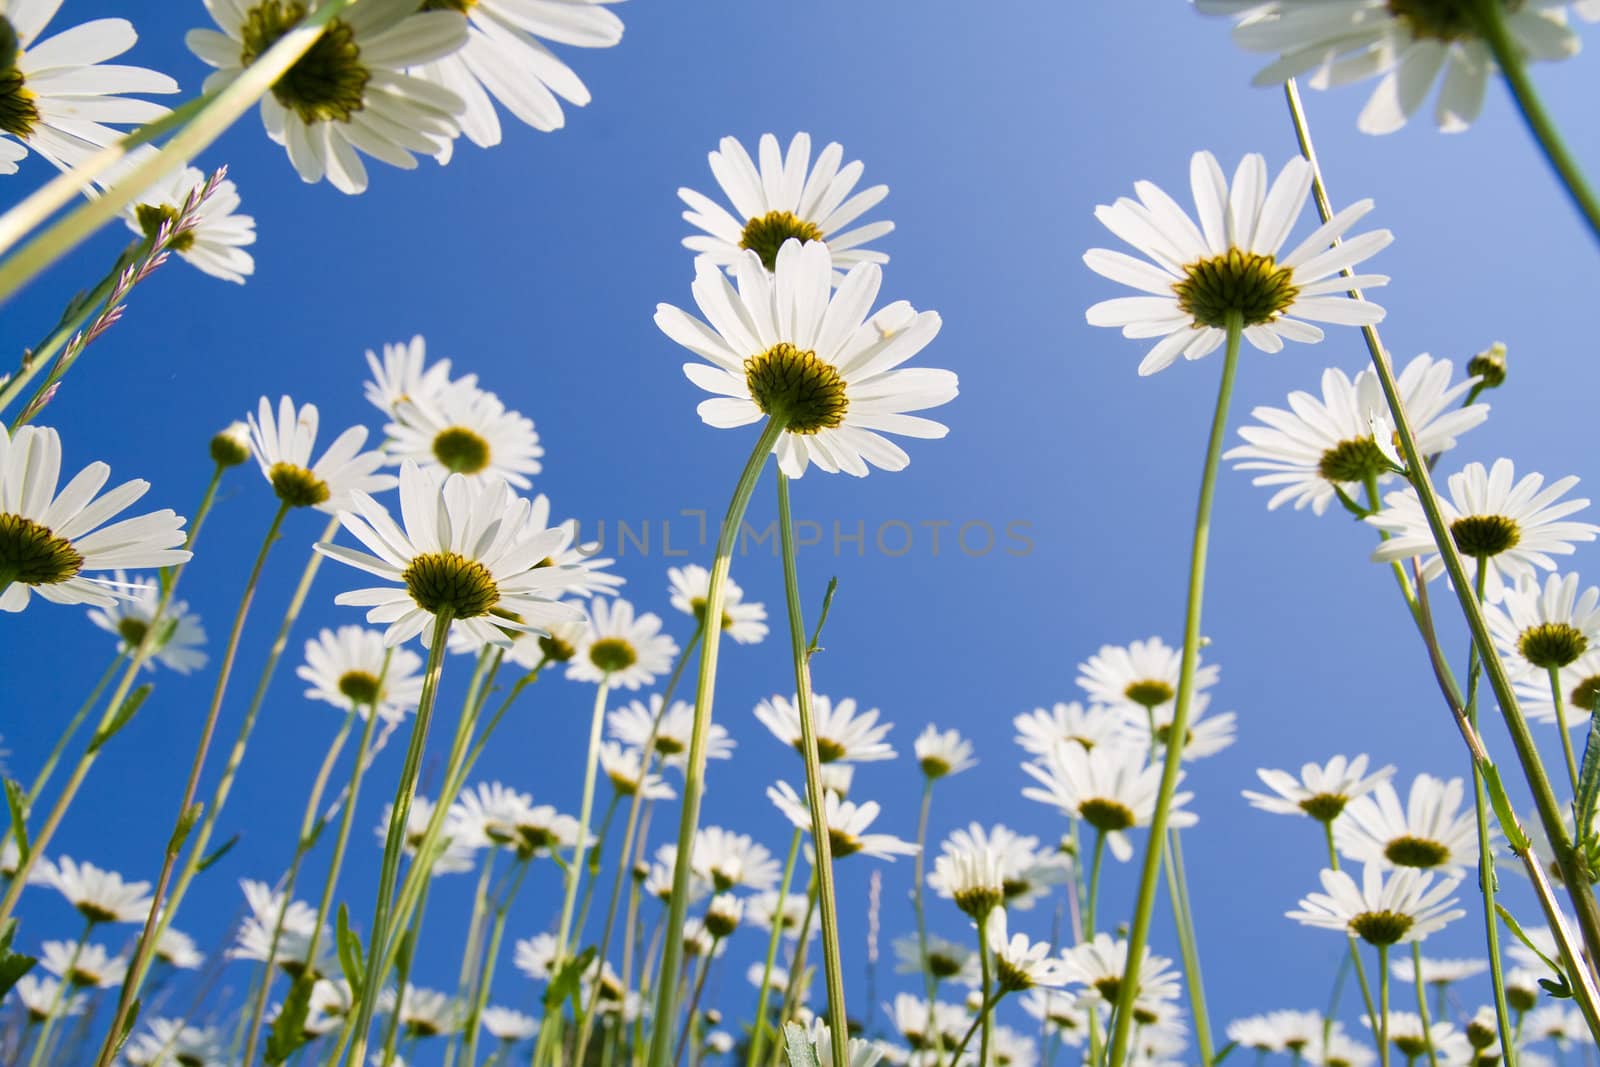 Golden daisies close-up against clear blue sky.